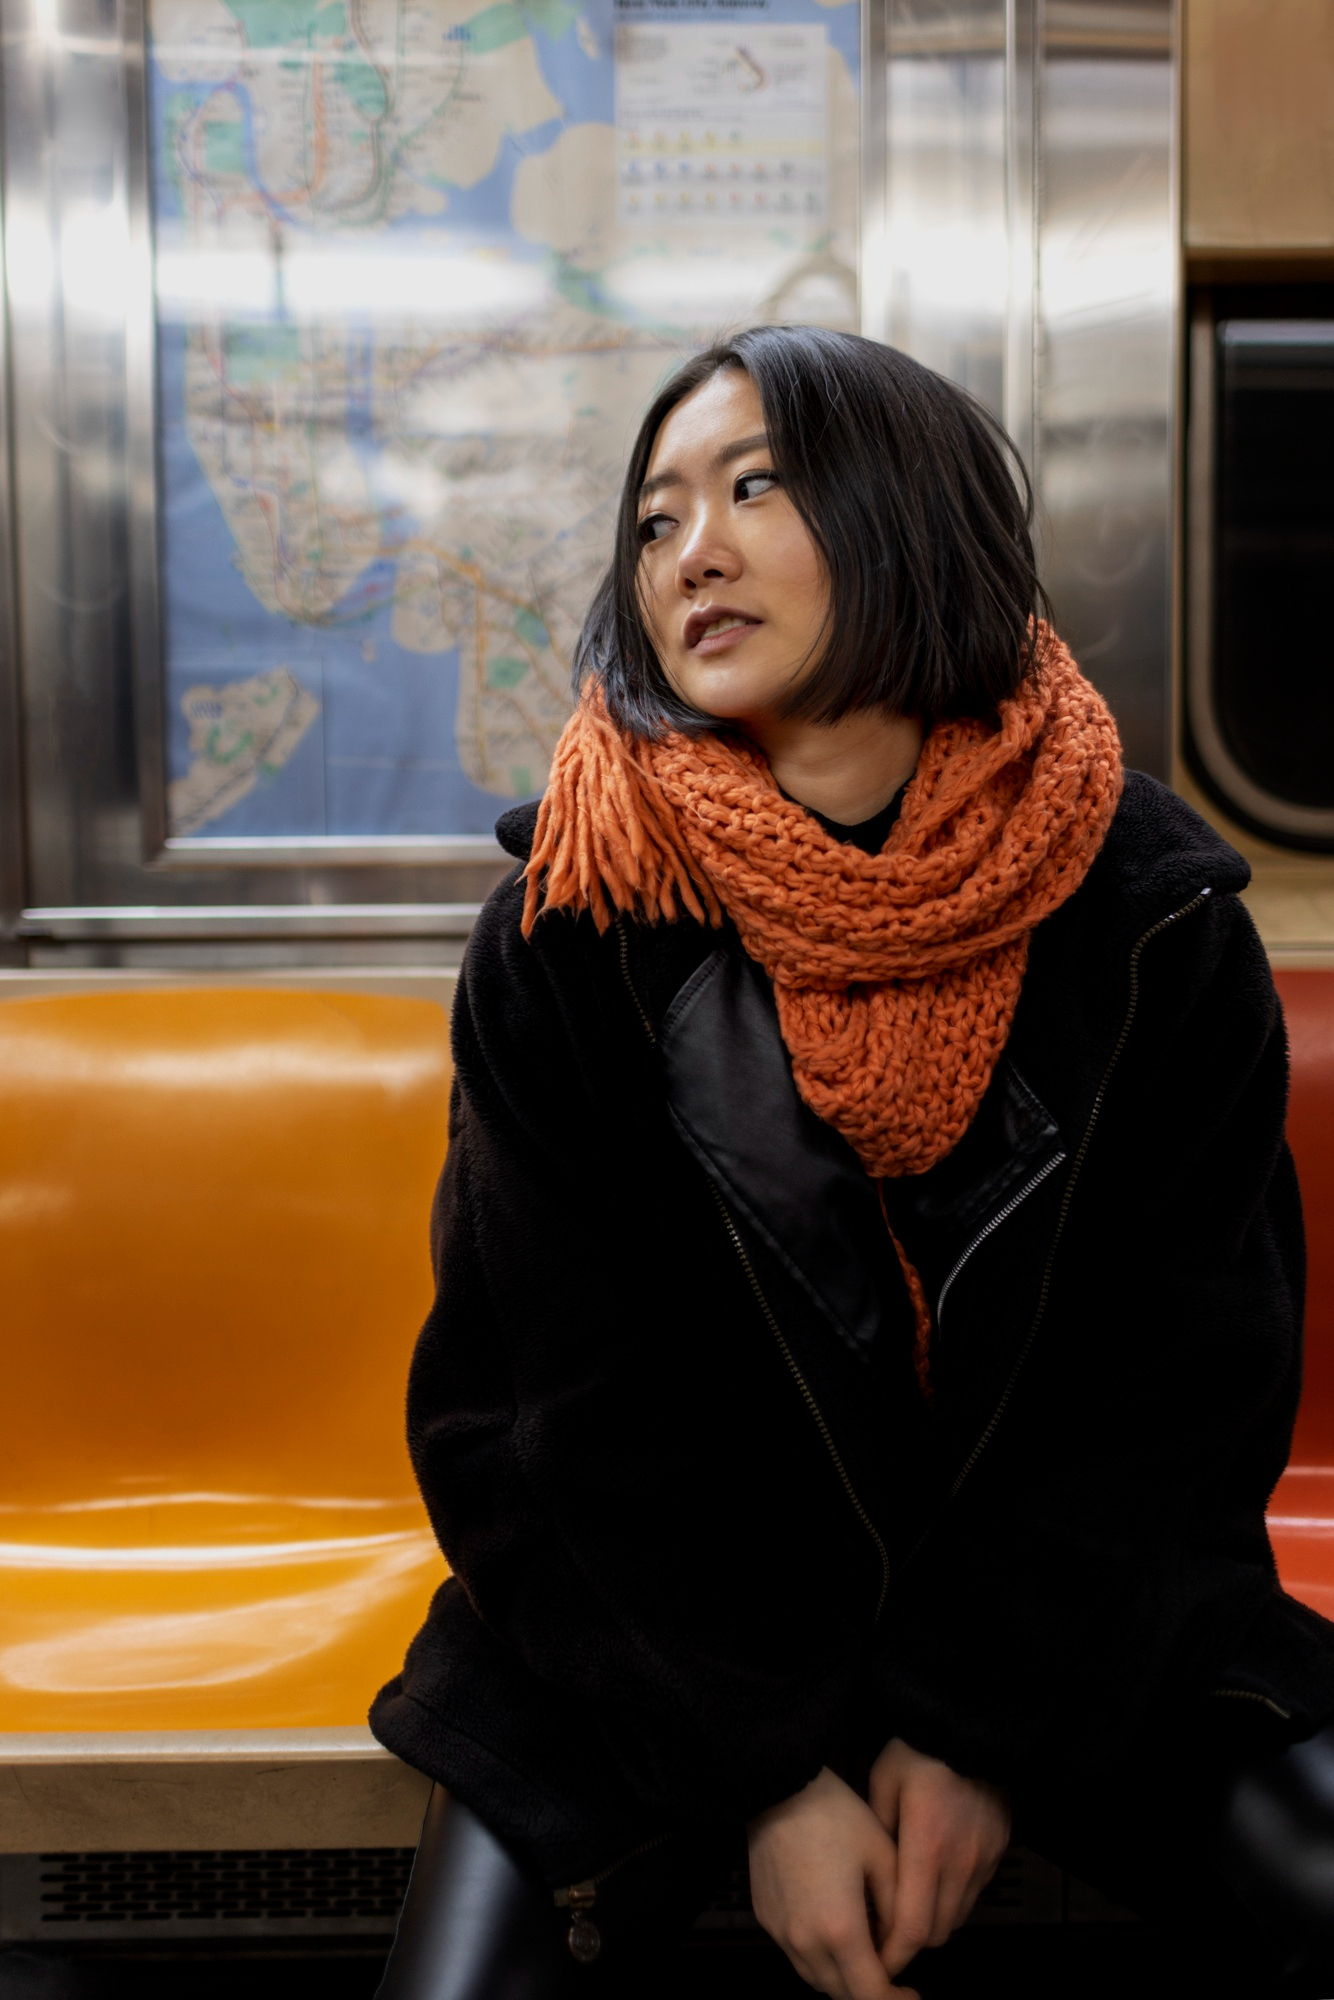 An embarrassed woman on the subway | Source: Freepik